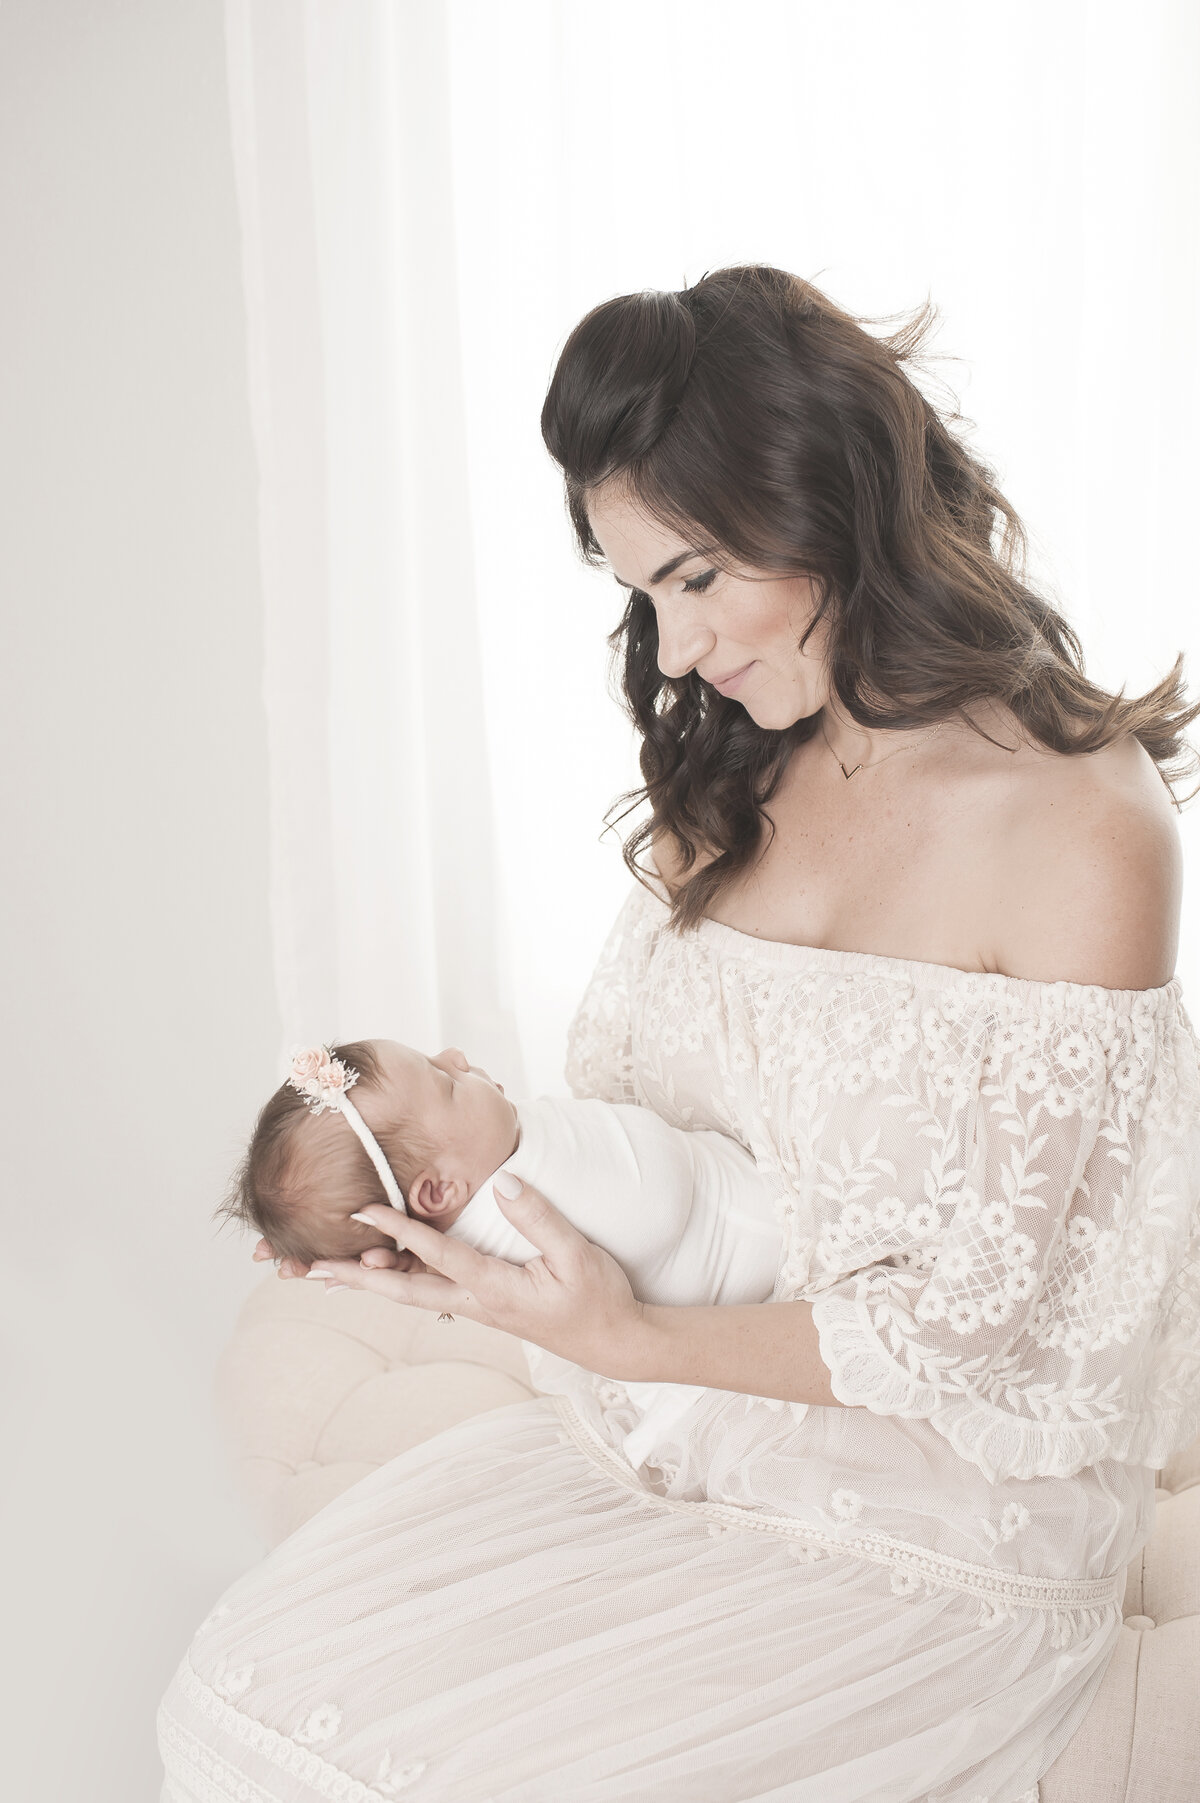 Woman in lace dress sitting and holding newborn baby girl